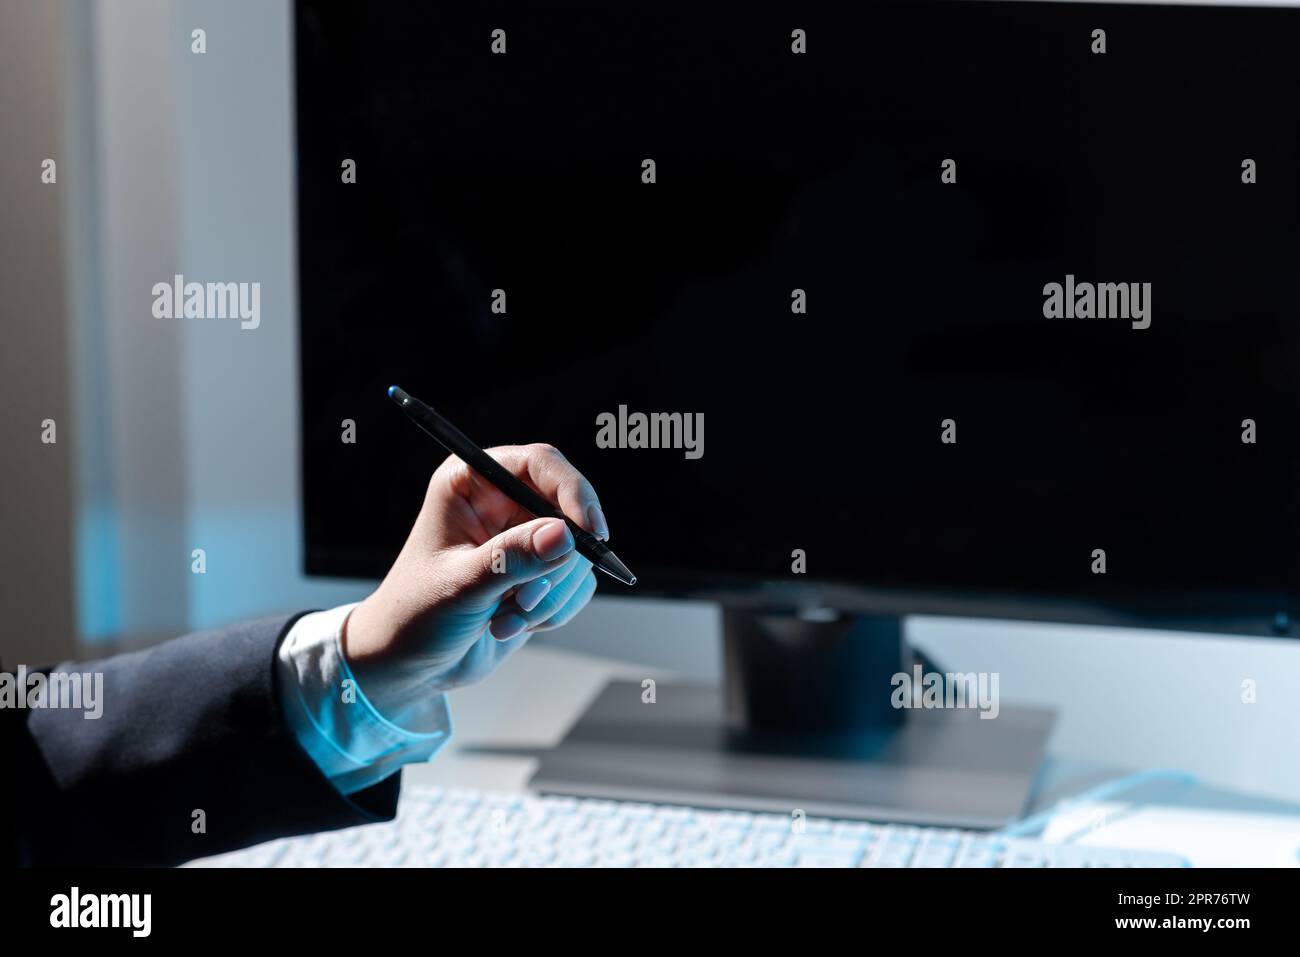 Businesswoman Holding Pen And Pointing On Important Messages On Table With Computer And Keyboard. Woman Presenting Crutial Information With One Hand. Stock Photo